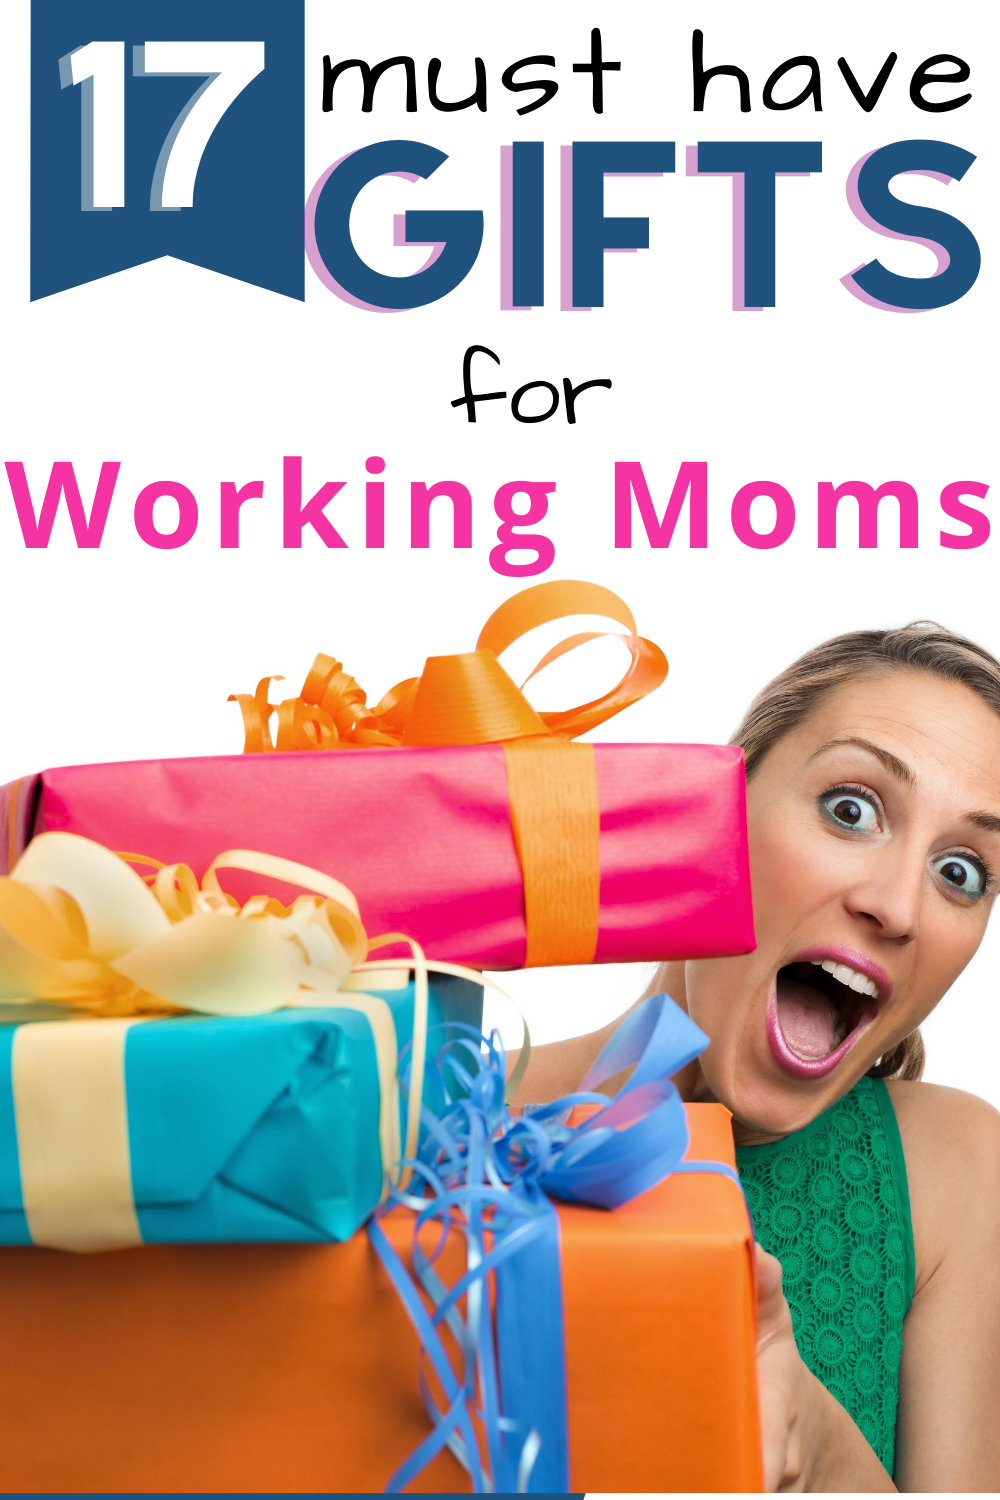 21 Useful Gifts for Working Moms in 2022 • Professional Momma